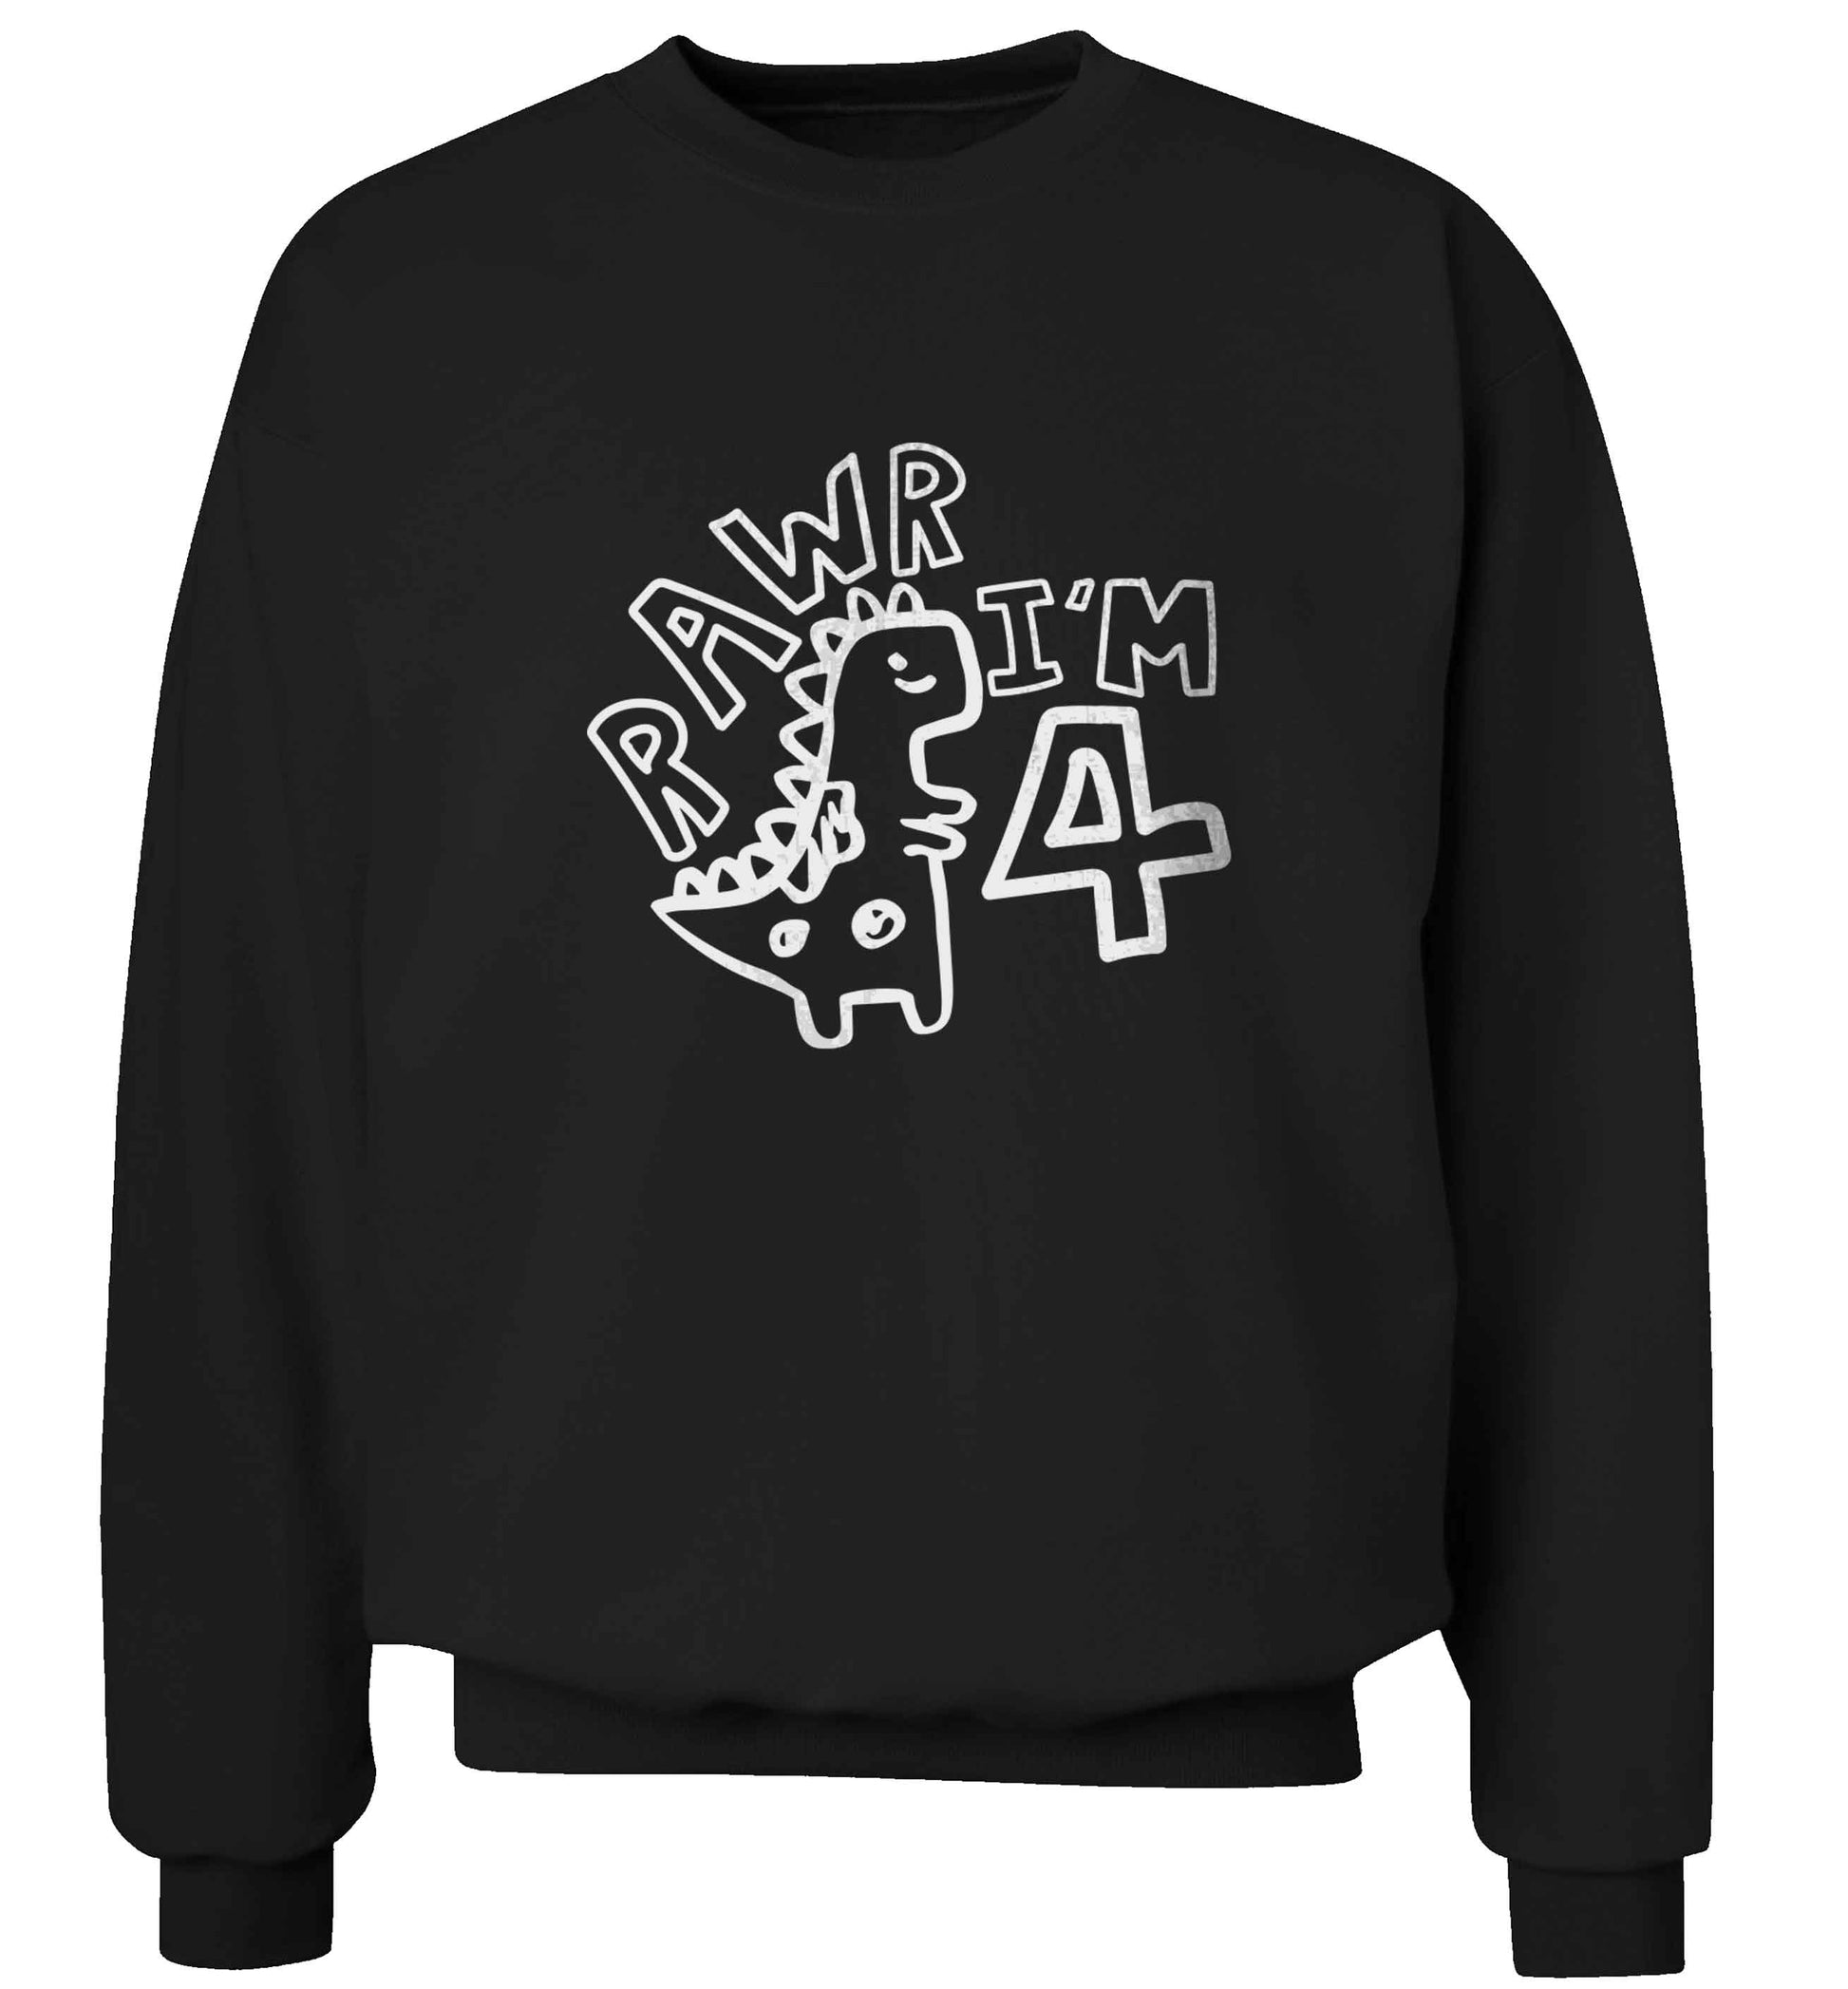 Rawr I'm four - personalise with ANY age! adult's unisex black sweater 2XL